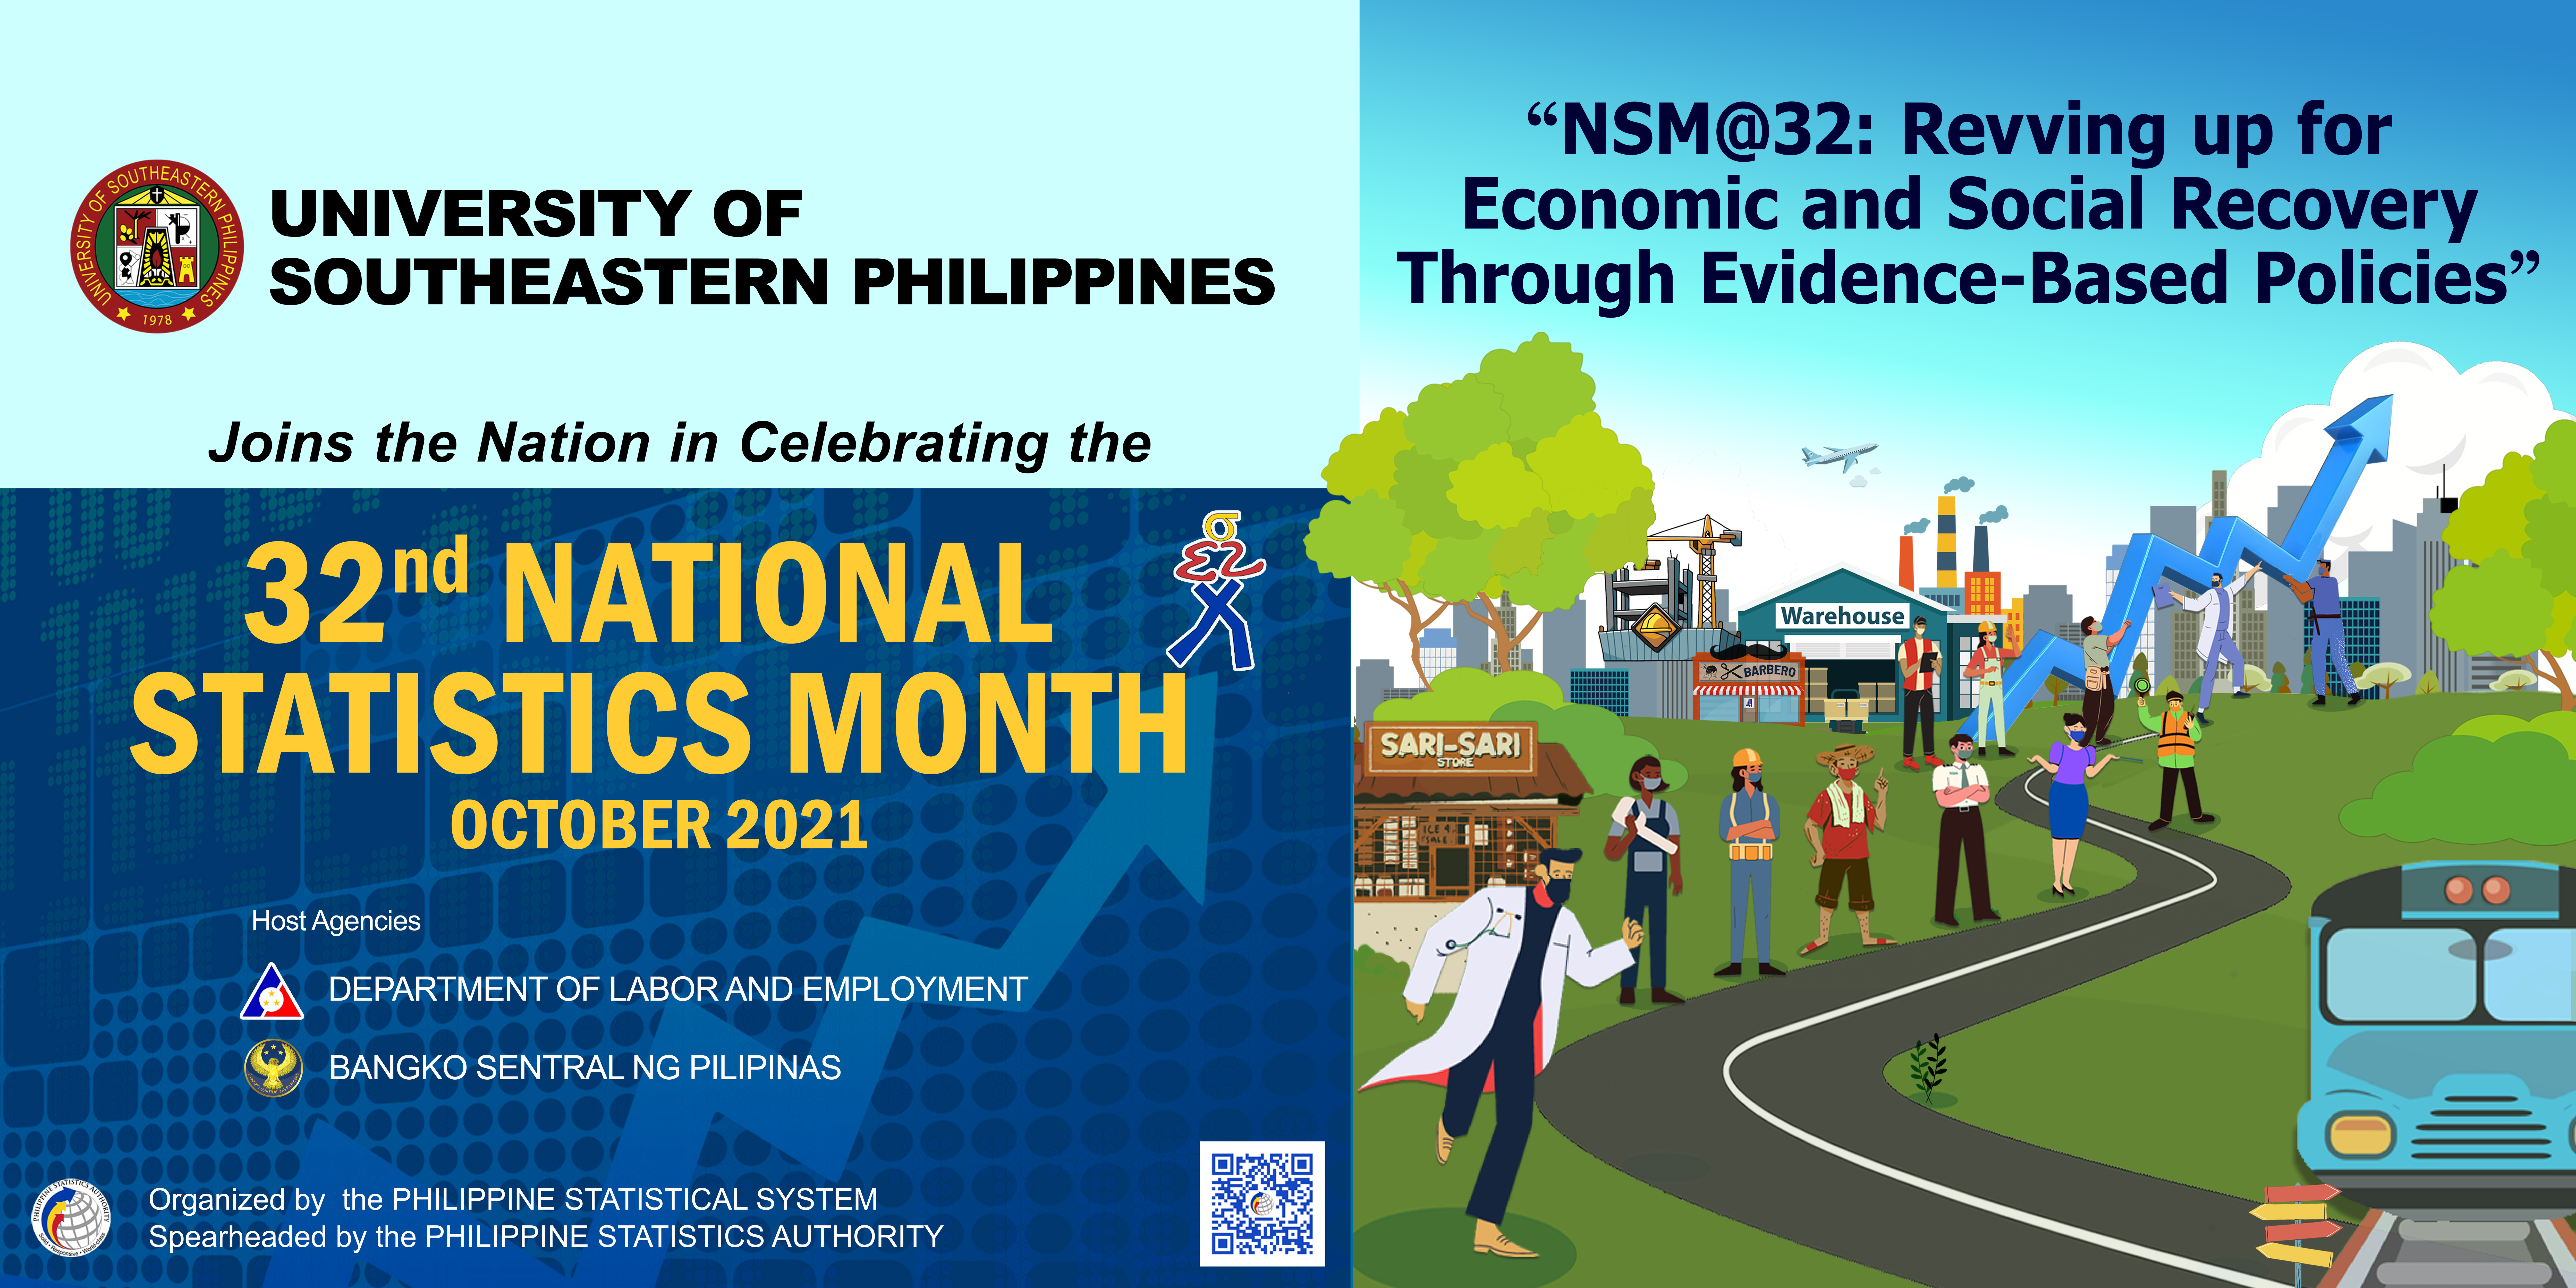 USeP joins the nation in celebrating the 32nd National Statistics Month